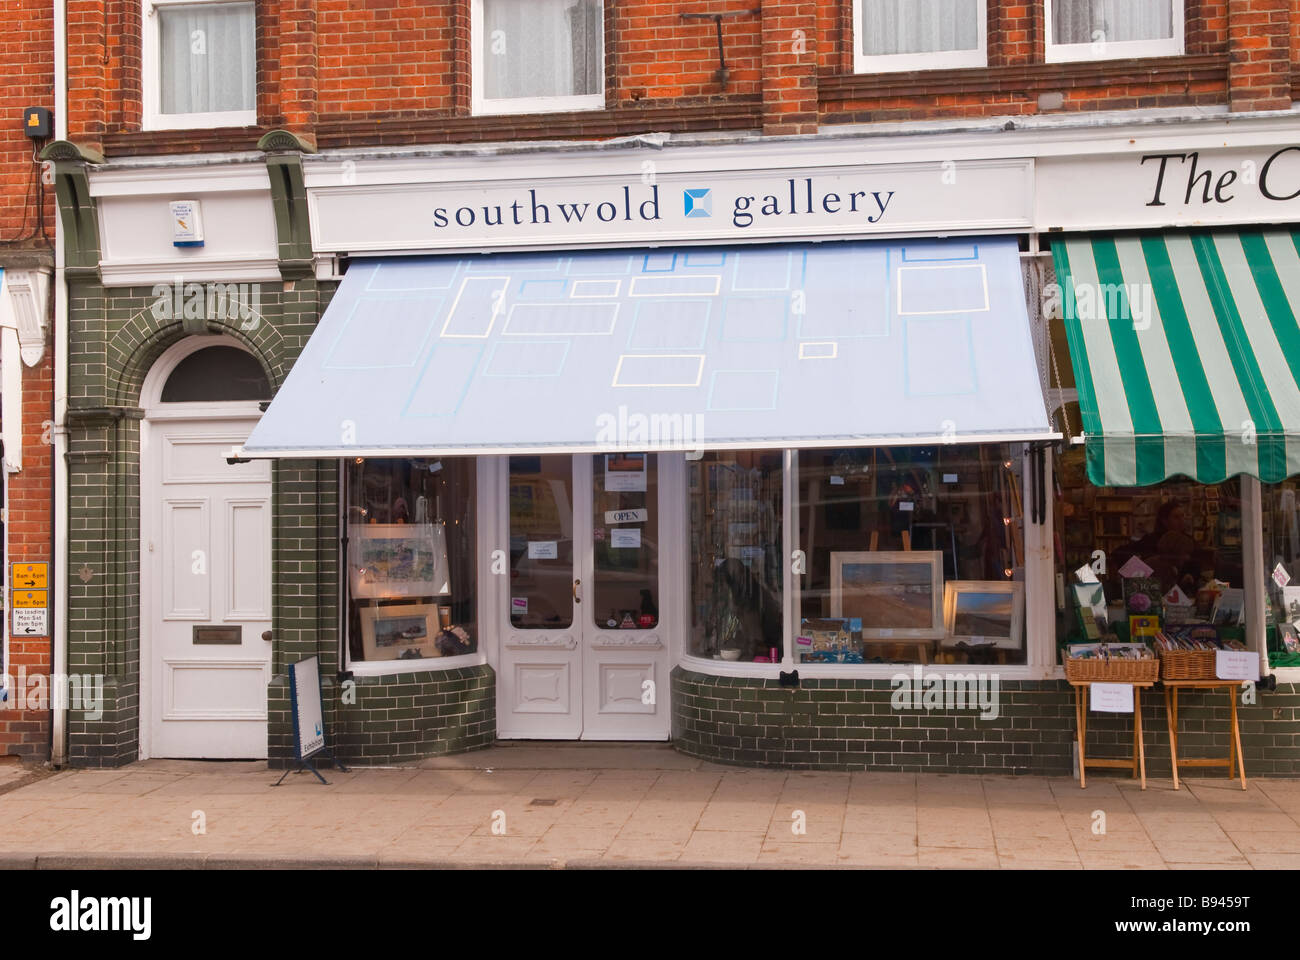 The southwold gallery in the high street selling paintings and artworks in Southwold,Suffolk,Uk Stock Photo